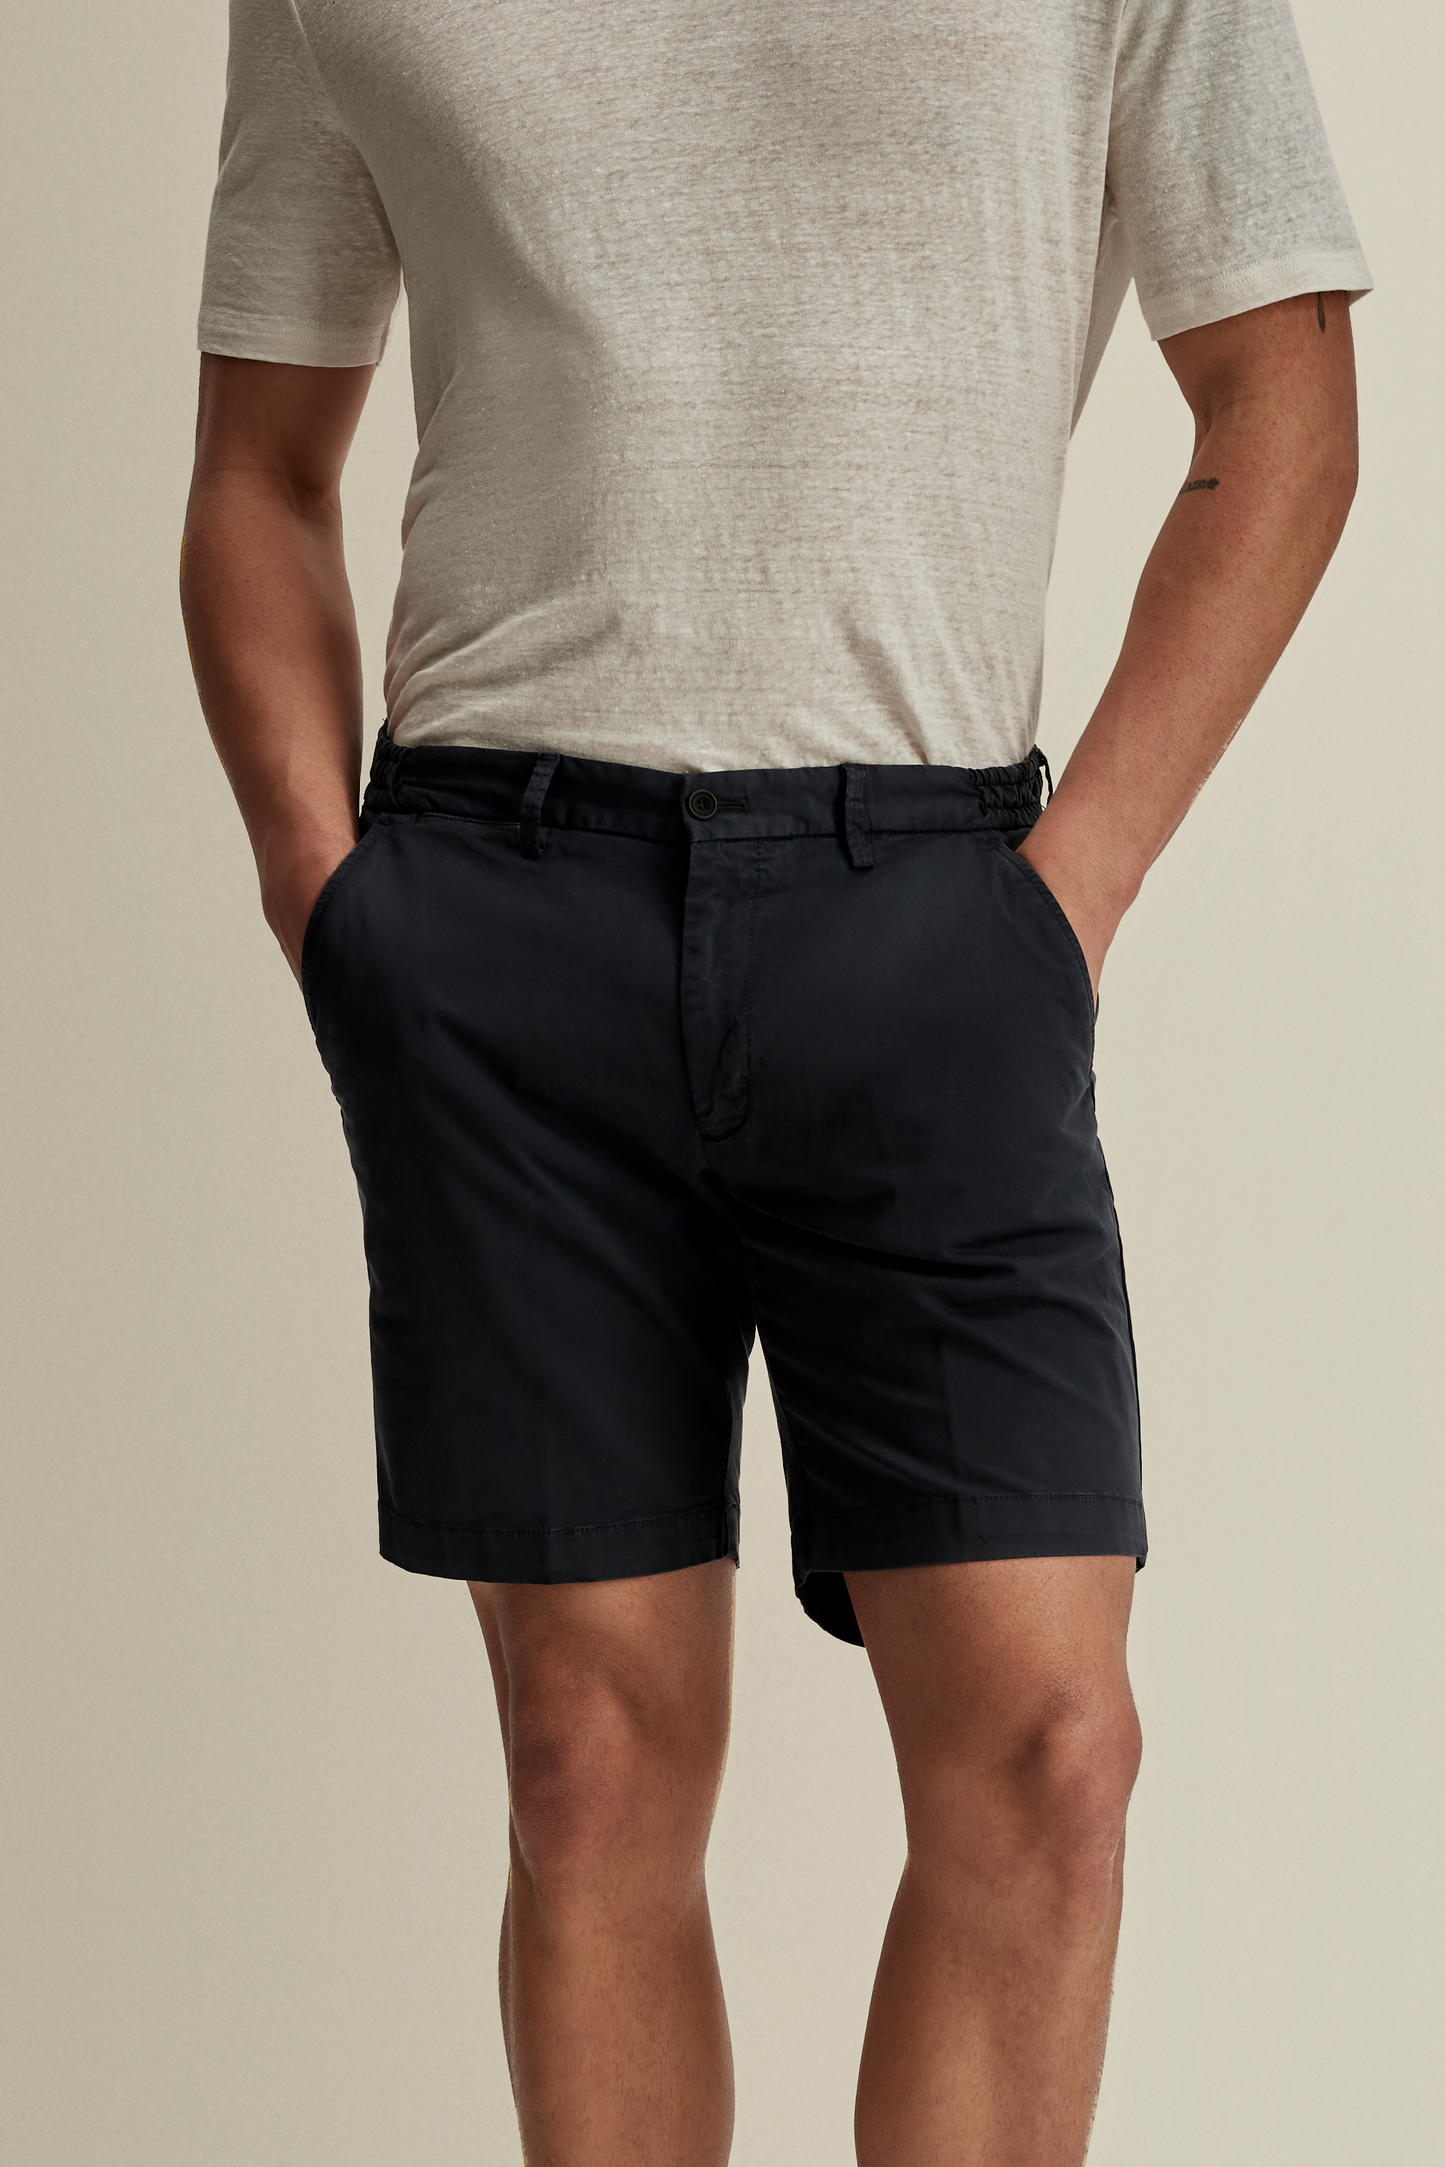 Cotton Flat Front Casual Shorts Navy Model Crop Image